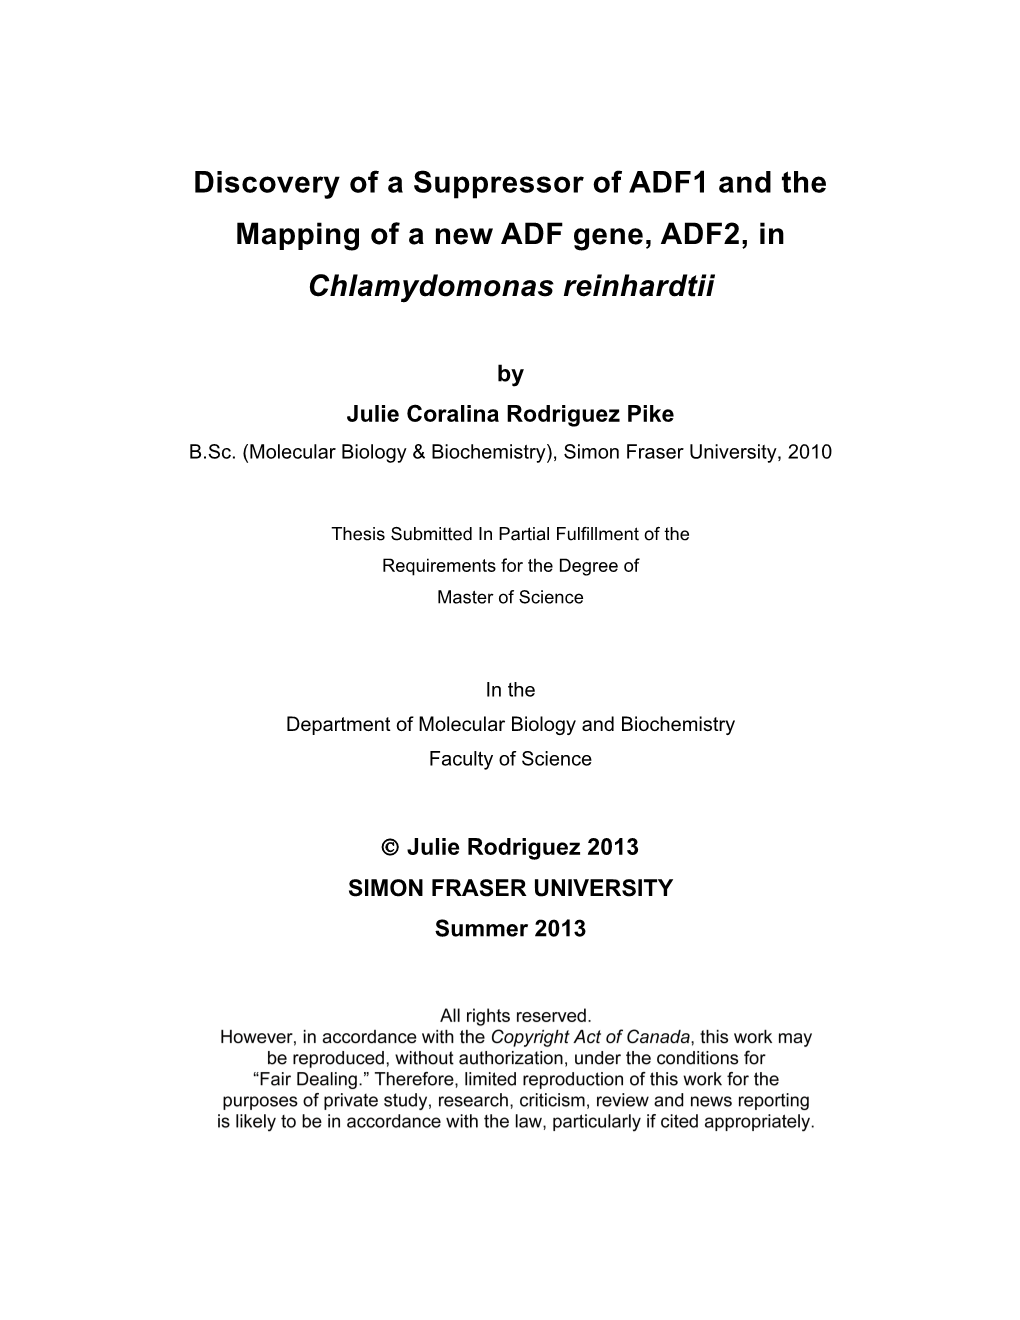 Discovery of a Suppressor of ADF1 and the Mapping of a New ADF Gene, ADF2, in Chlamydomonas Reinhardtii